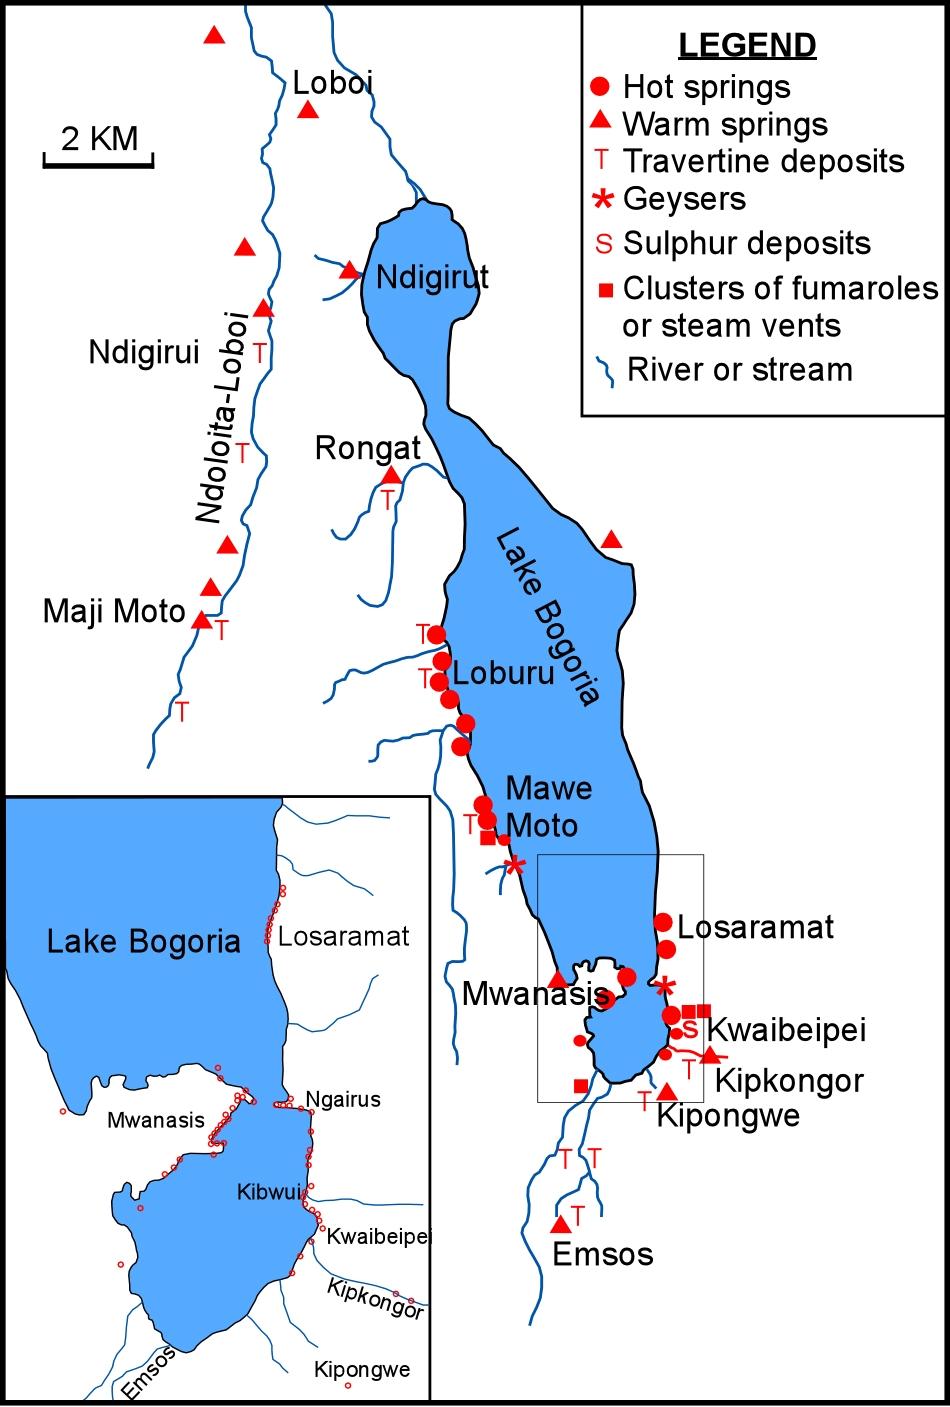 Most o these manifestations occur along the shores of Lake Bogoria and at the Arus springs (Figure ).